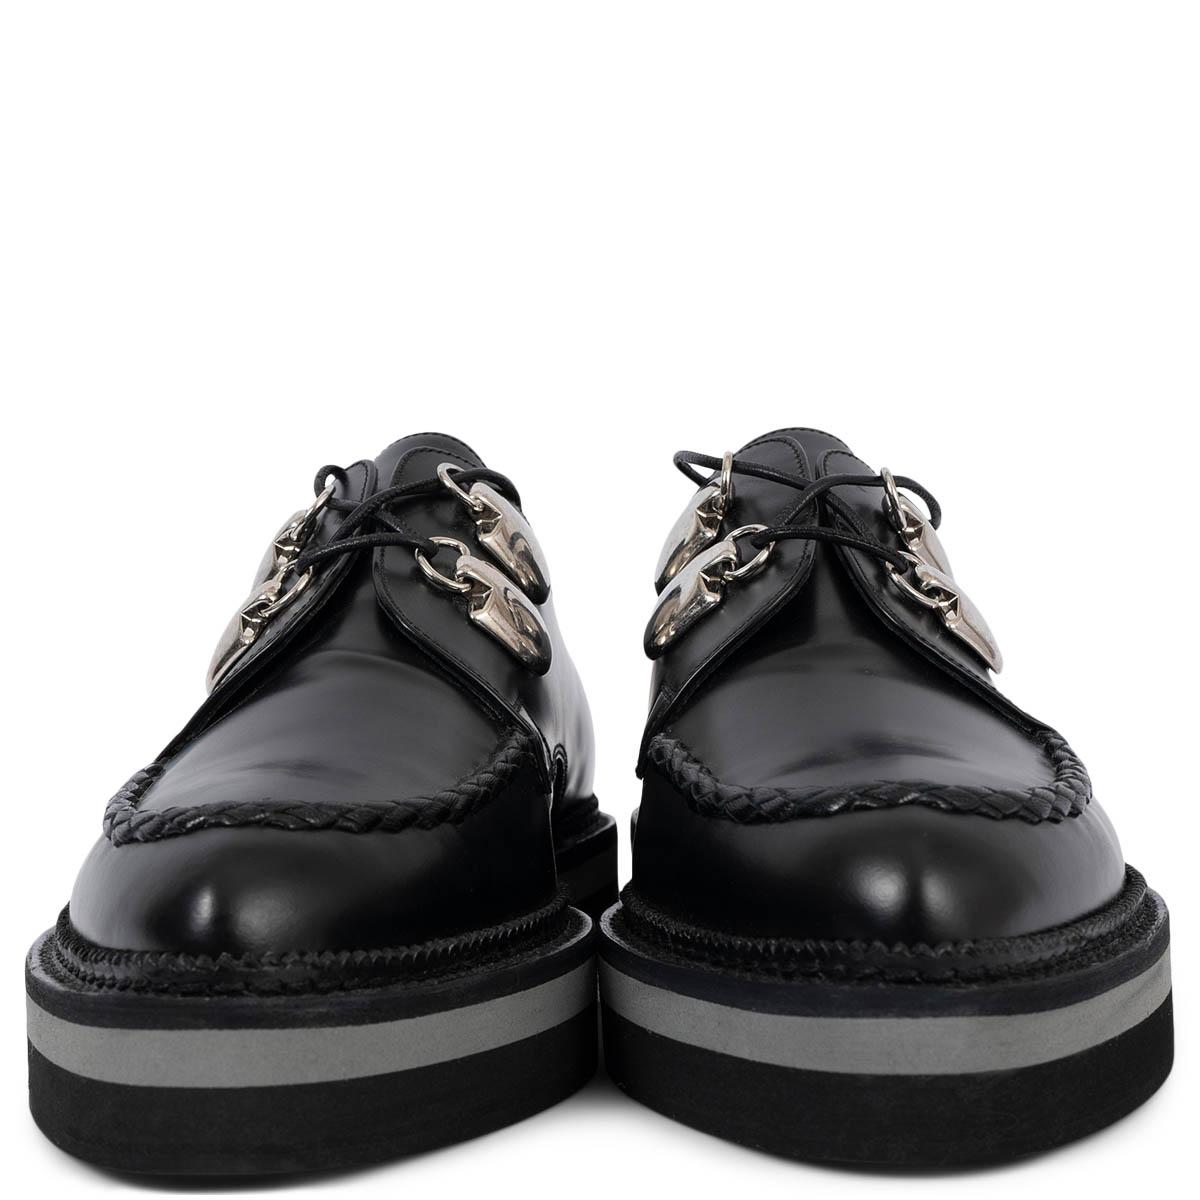 100% authentic Alexander McQueen lace-up platform shoes in smooth black leather with silver-tone hardware details. Have been worn and are in excellent condition. Come with dust bag. 

Measurements
Imprinted Size	39
Shoe Size	39
Inside Sole	26cm